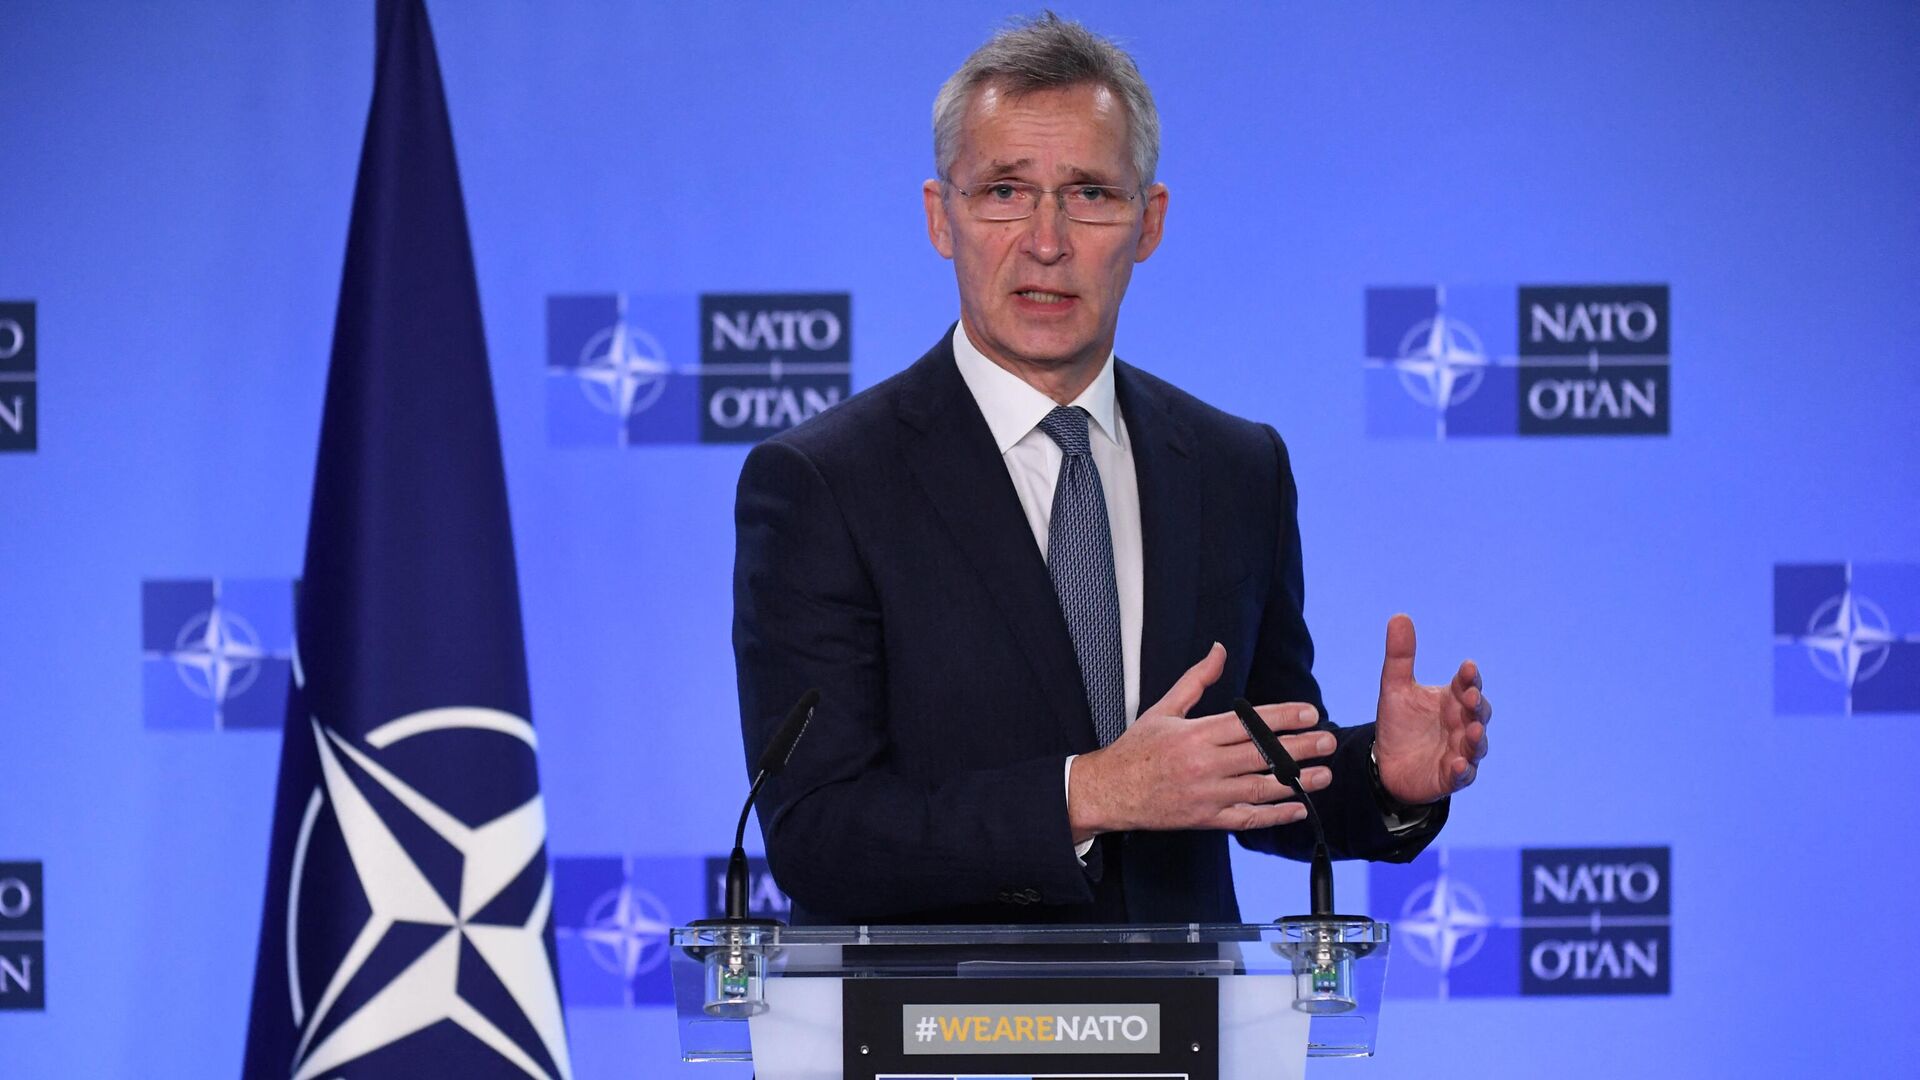 NATO Secretary General Jens Stoltenberg gestures as he speaks during a joint press conference with Ukraine's Deputy Prime Minister for European and Euro-Atlantic Integration after their bilateral meeting at the NATO headquarters in Brussels on January 10, 2022.  - Sputnik International, 1920, 10.04.2022